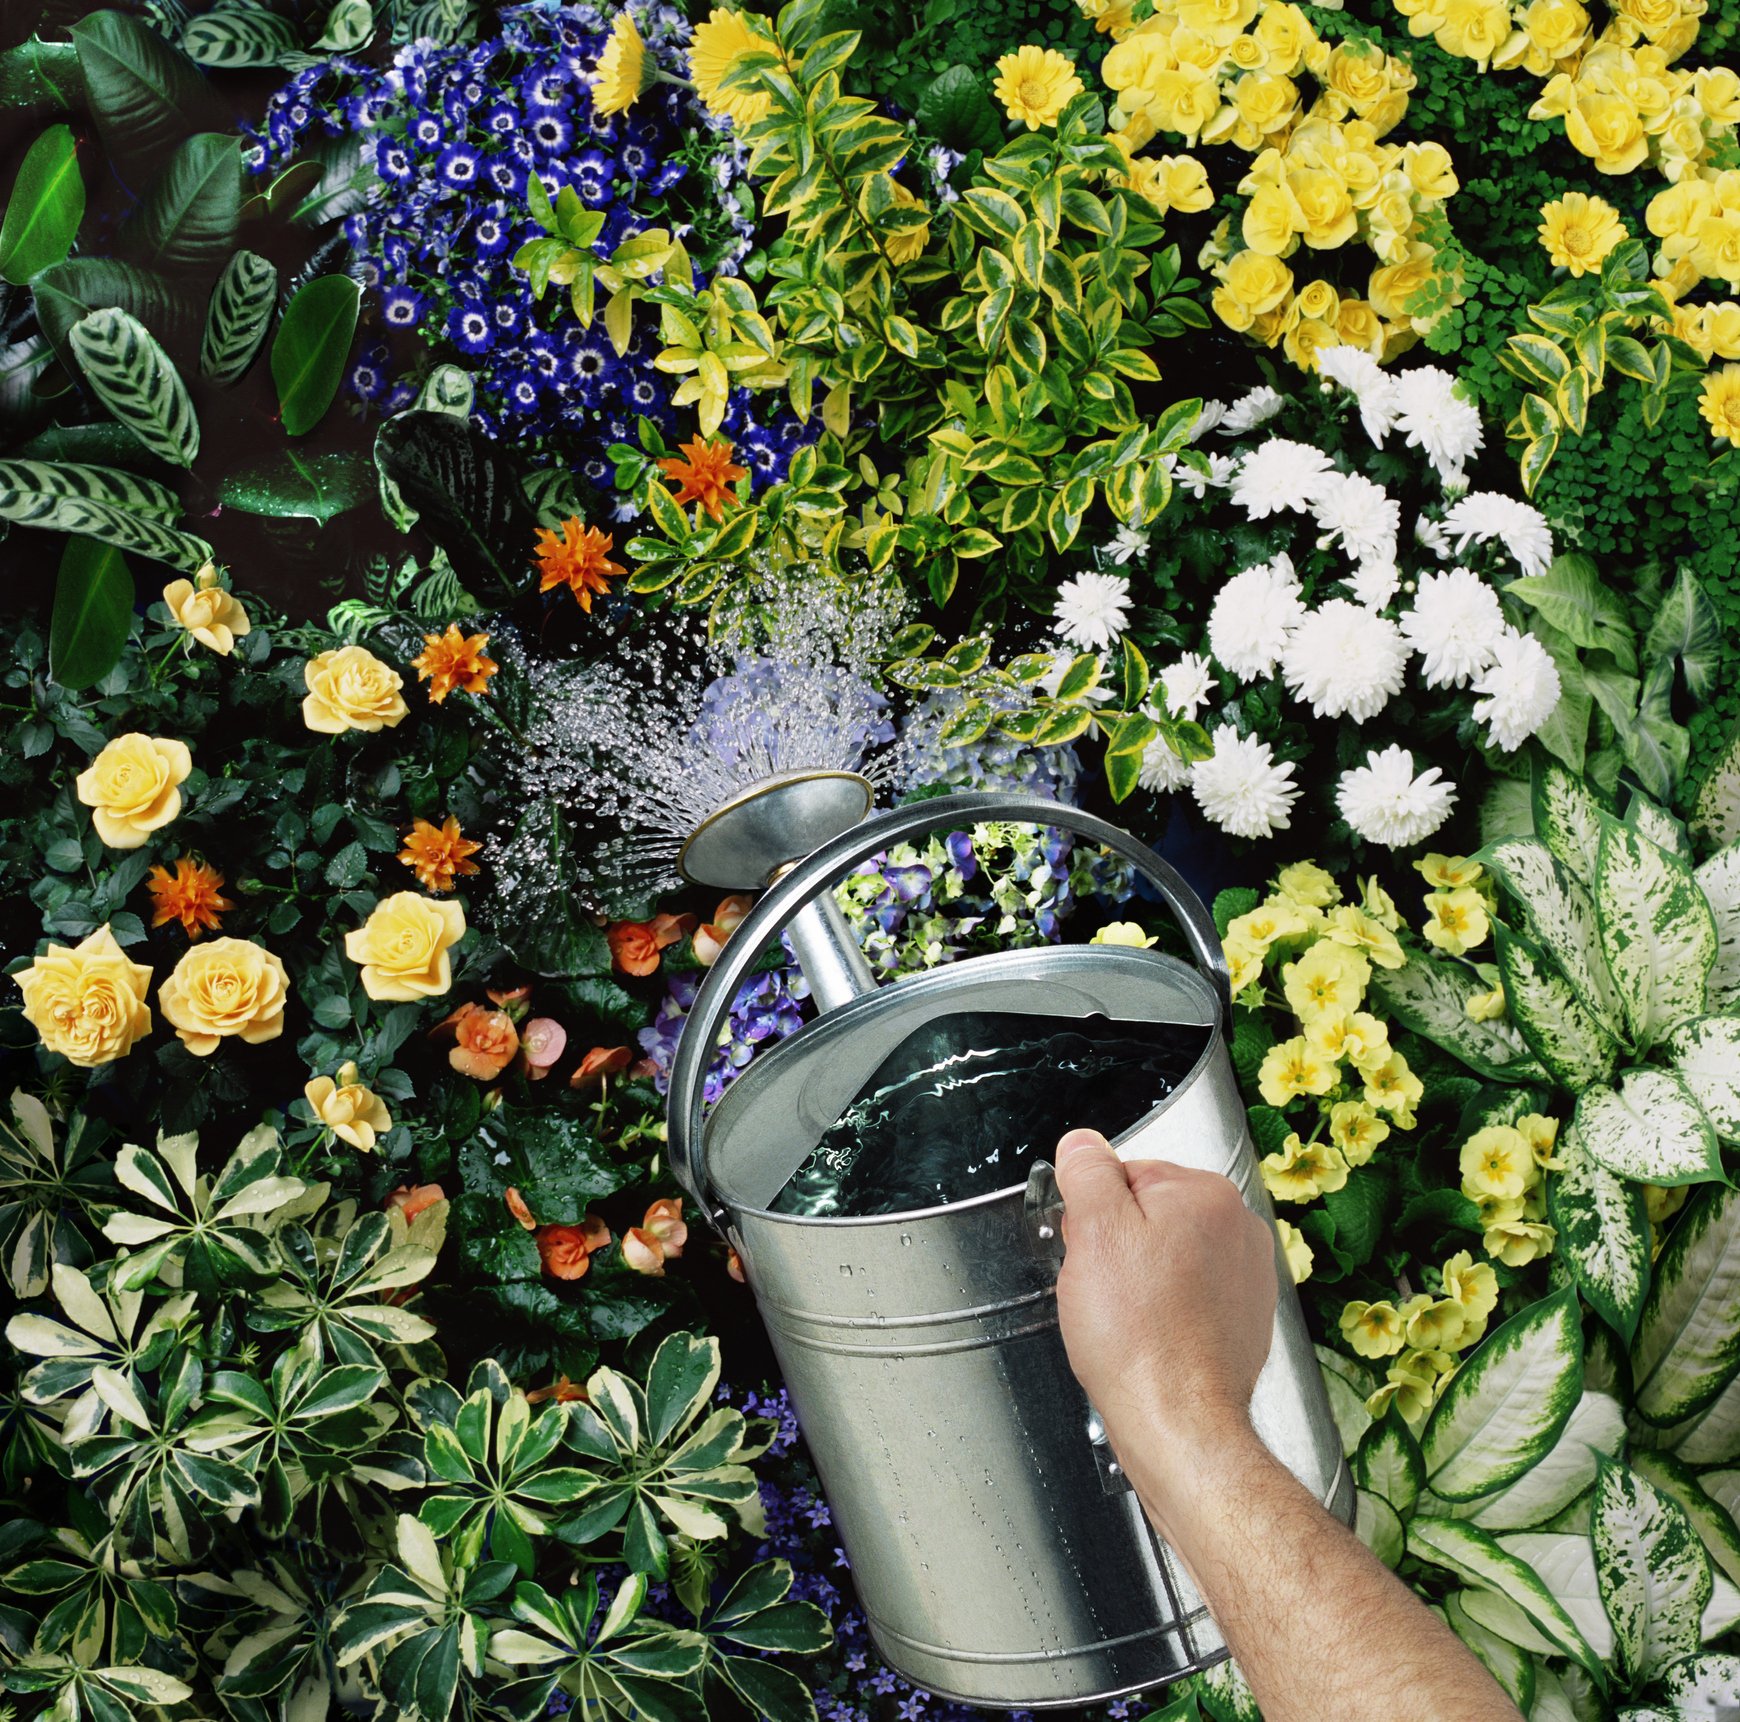 Man watering flowers, close-up of hand and watering can | Photo: Getty Images